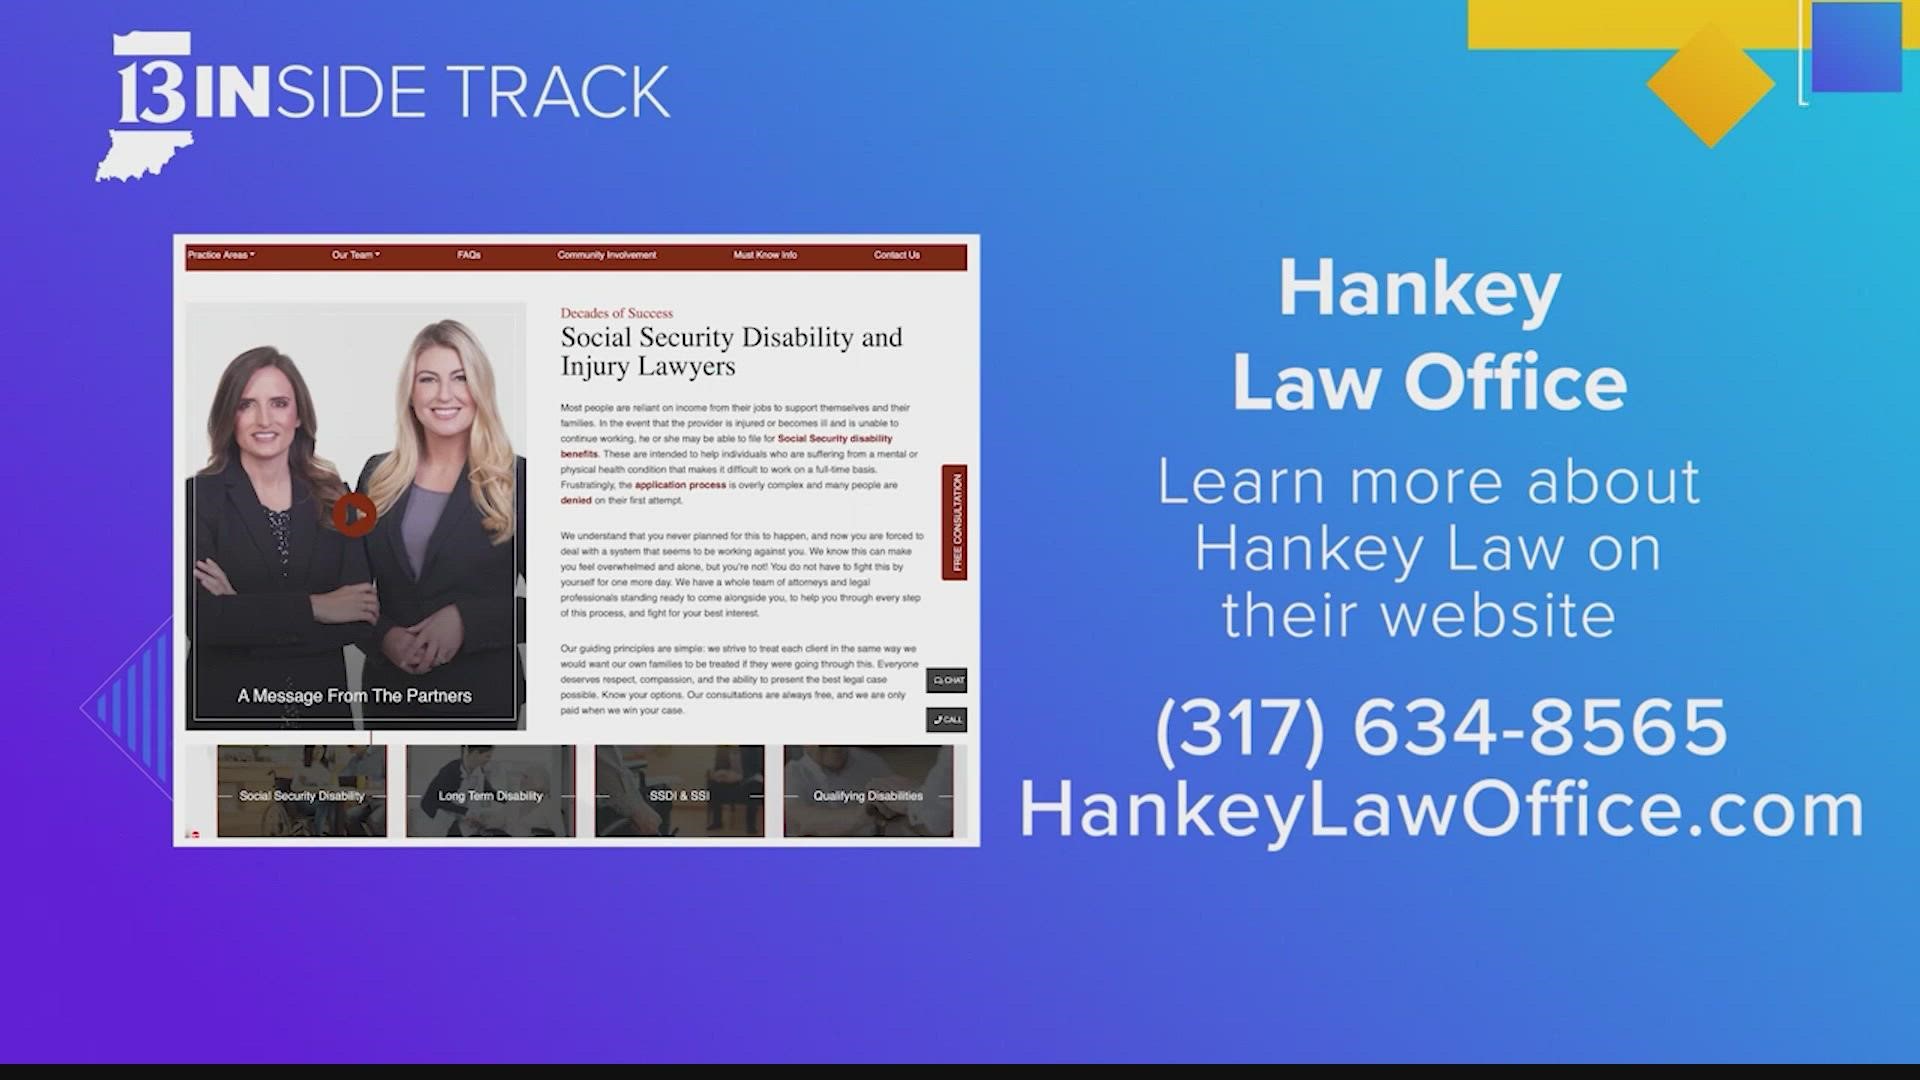 Hankey Law Office said it can take a long time to get benefits and it helps to have a partner navigate the process.